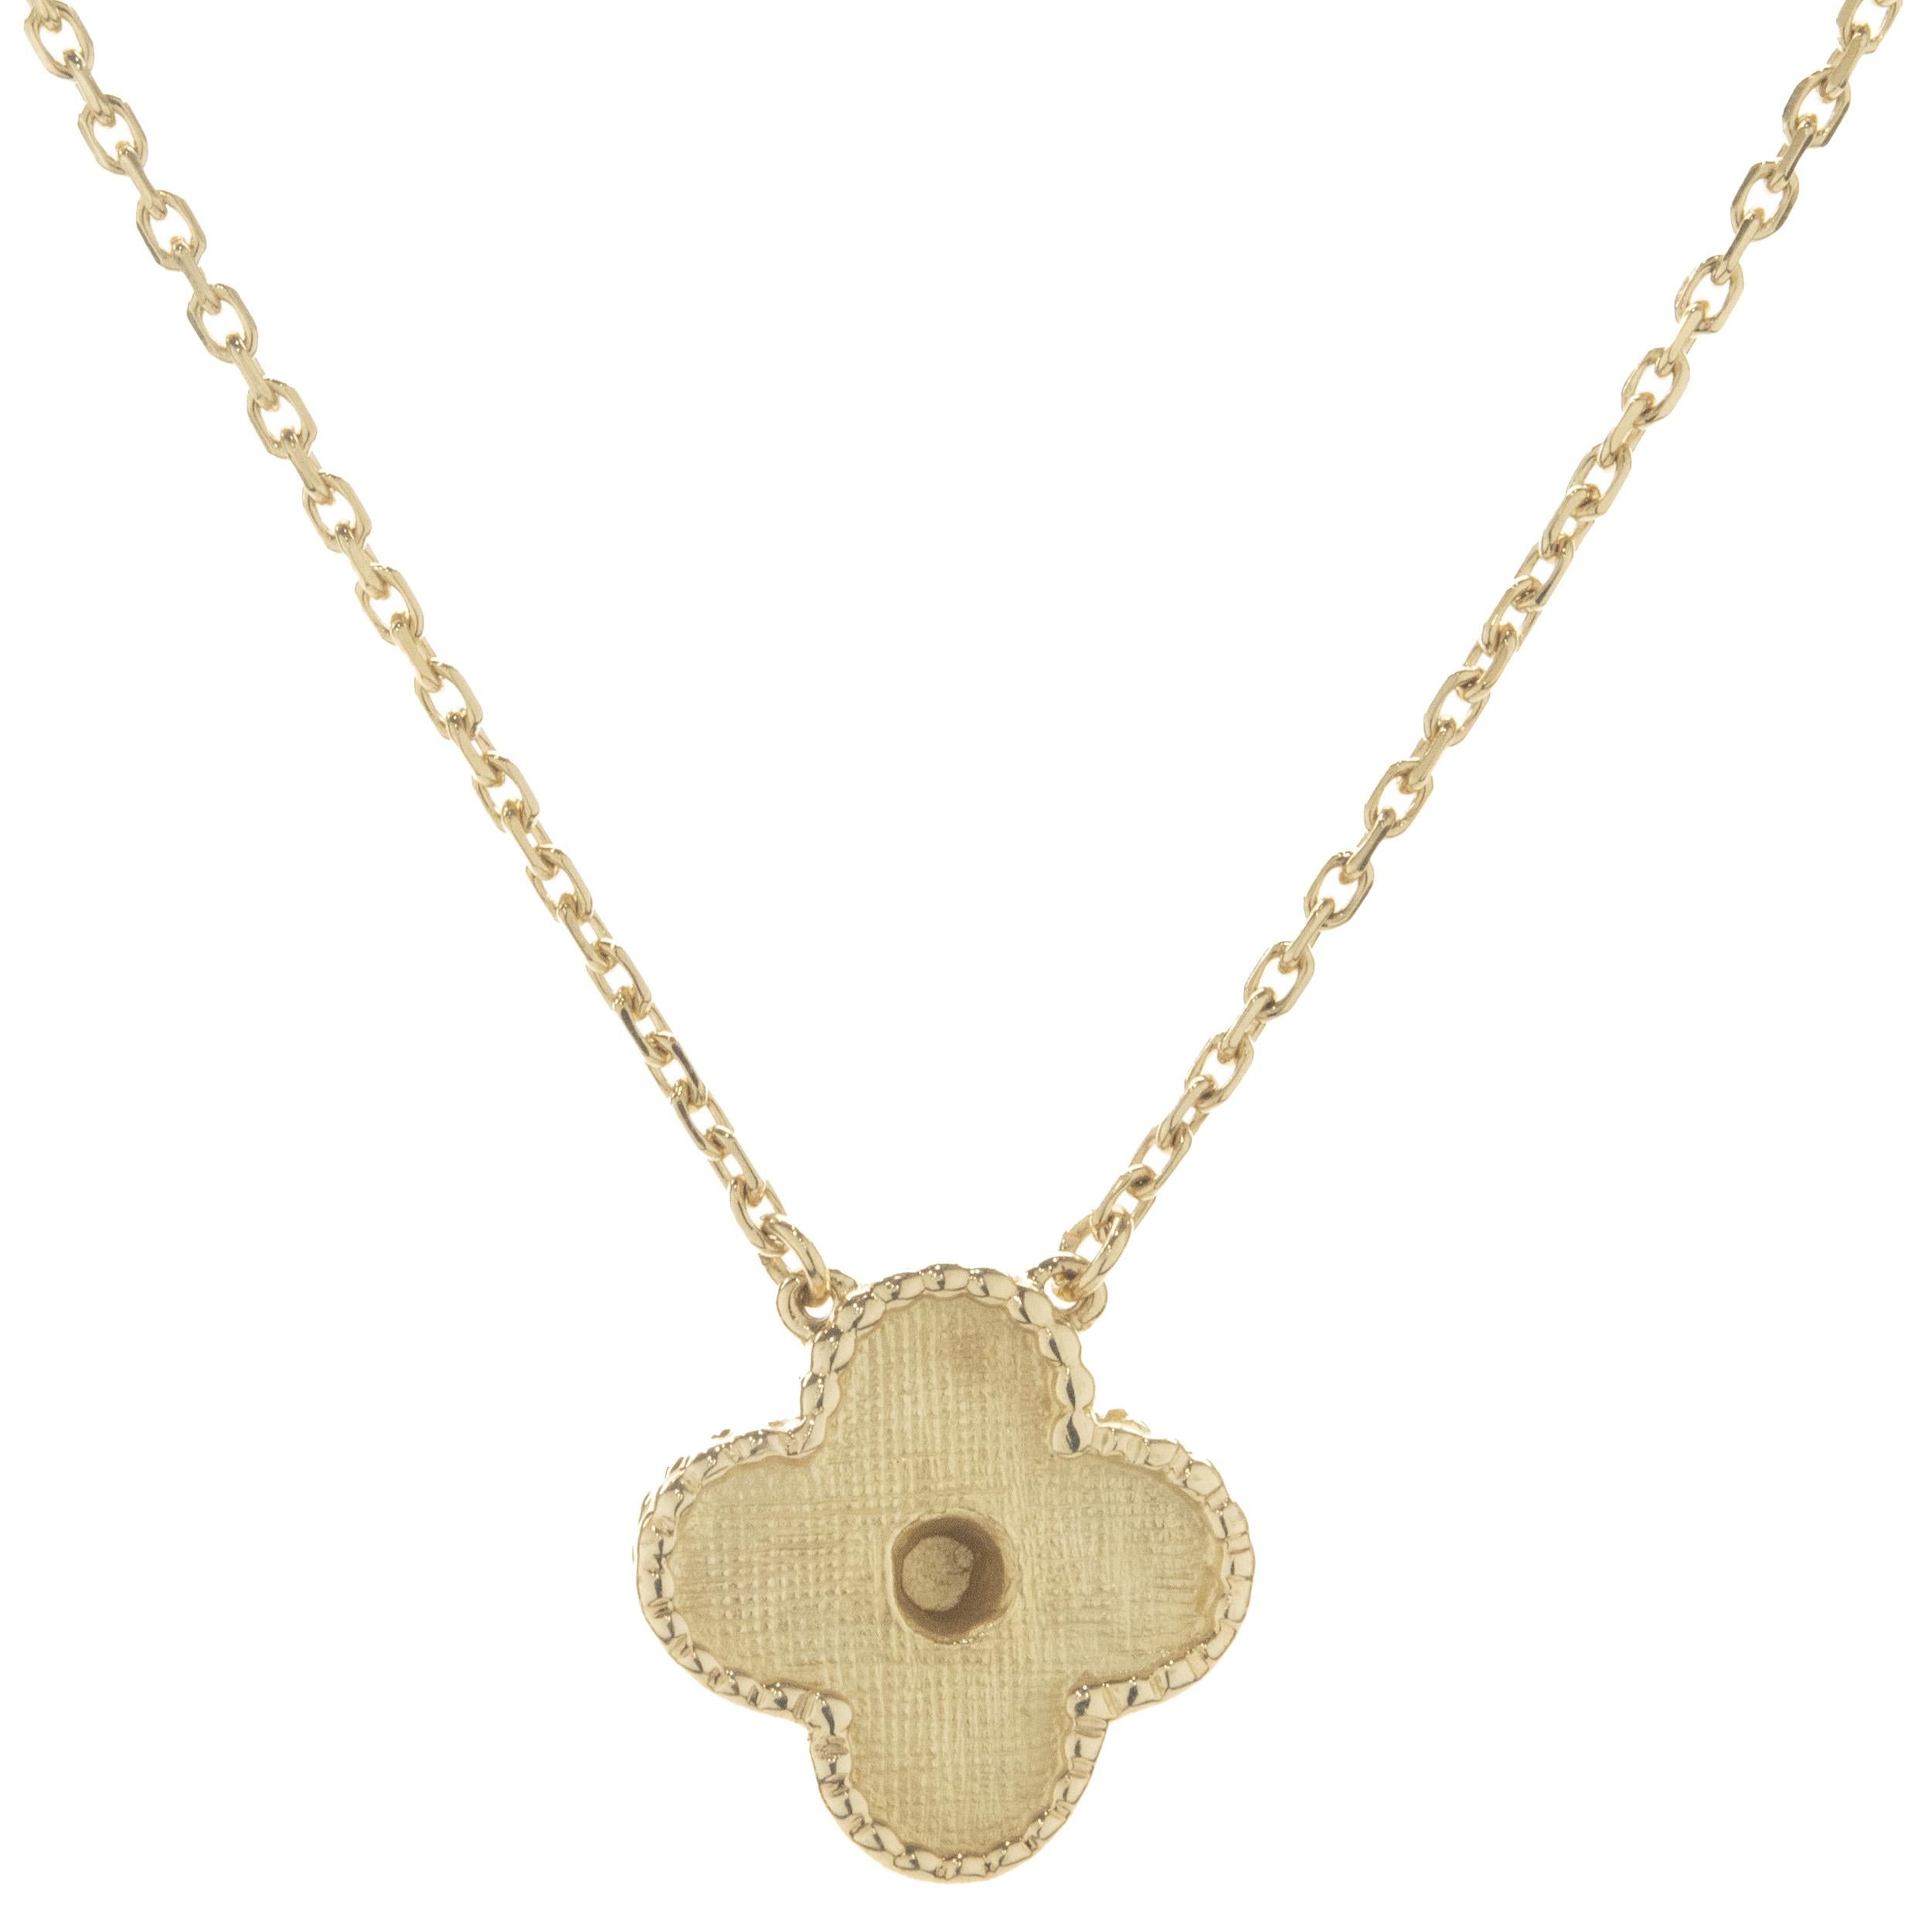 Material: 18K yellow gold
Dimensions: necklace measures 18-inches in length
Weight: 5.91 grams